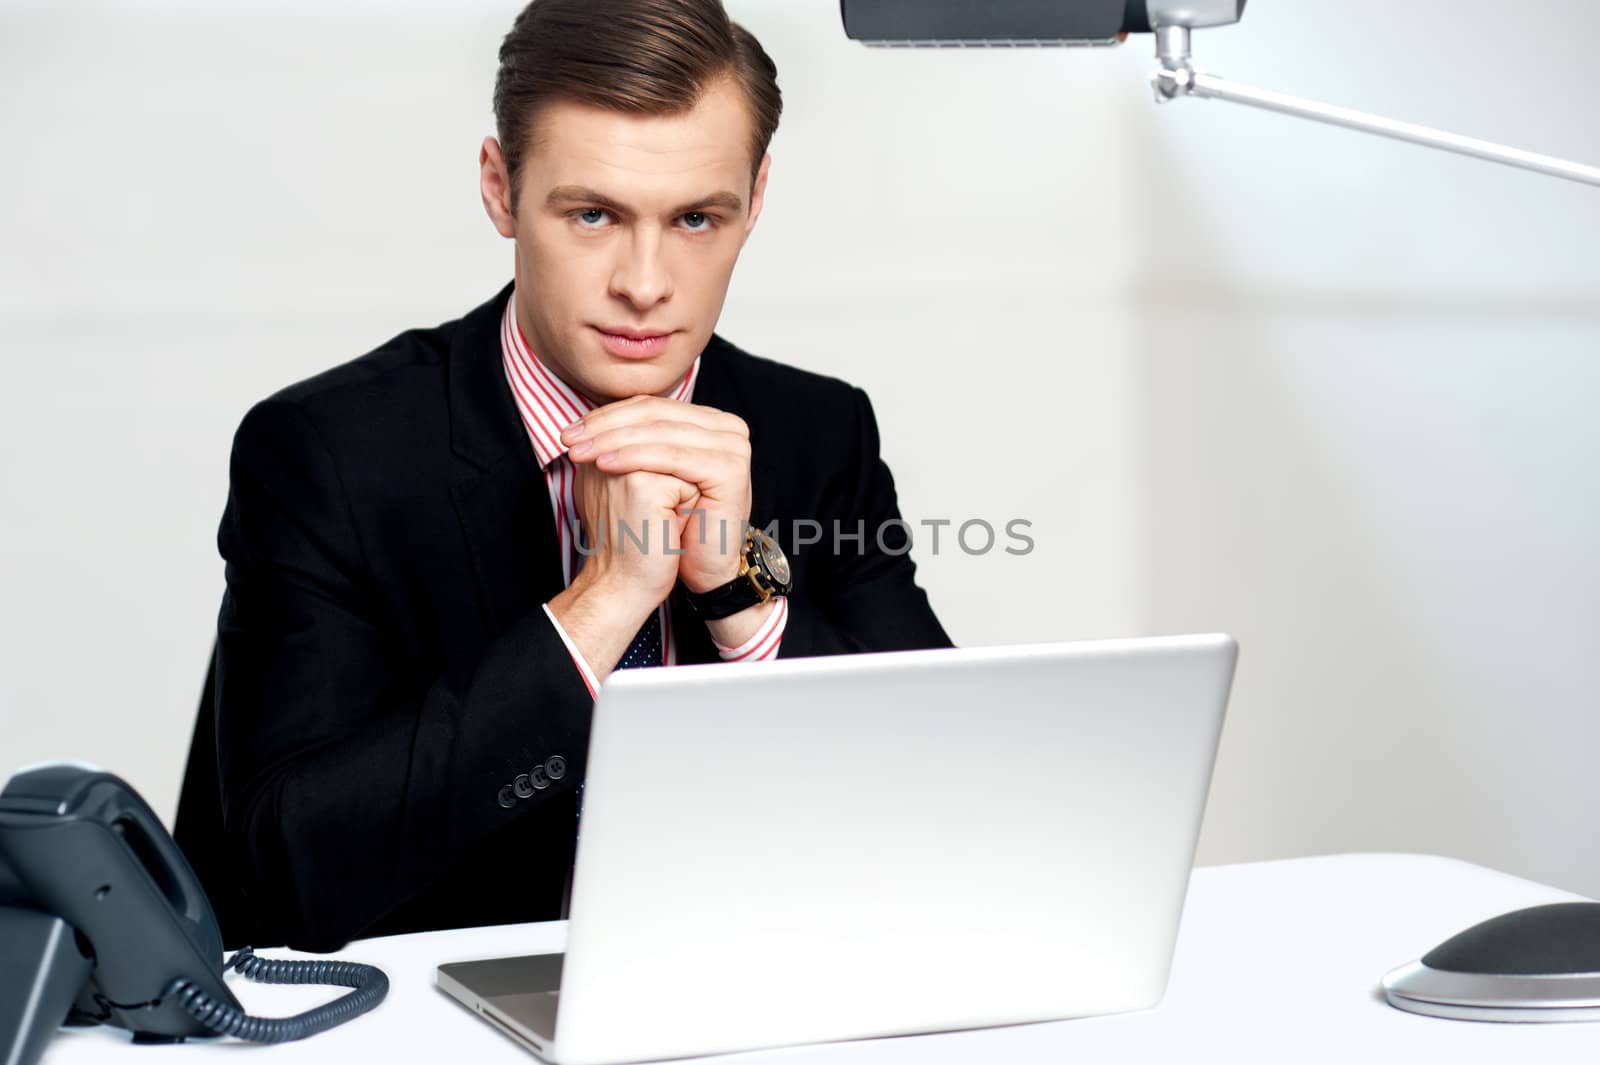 Portrait of businessman sitting in front of laptop with hands on chin